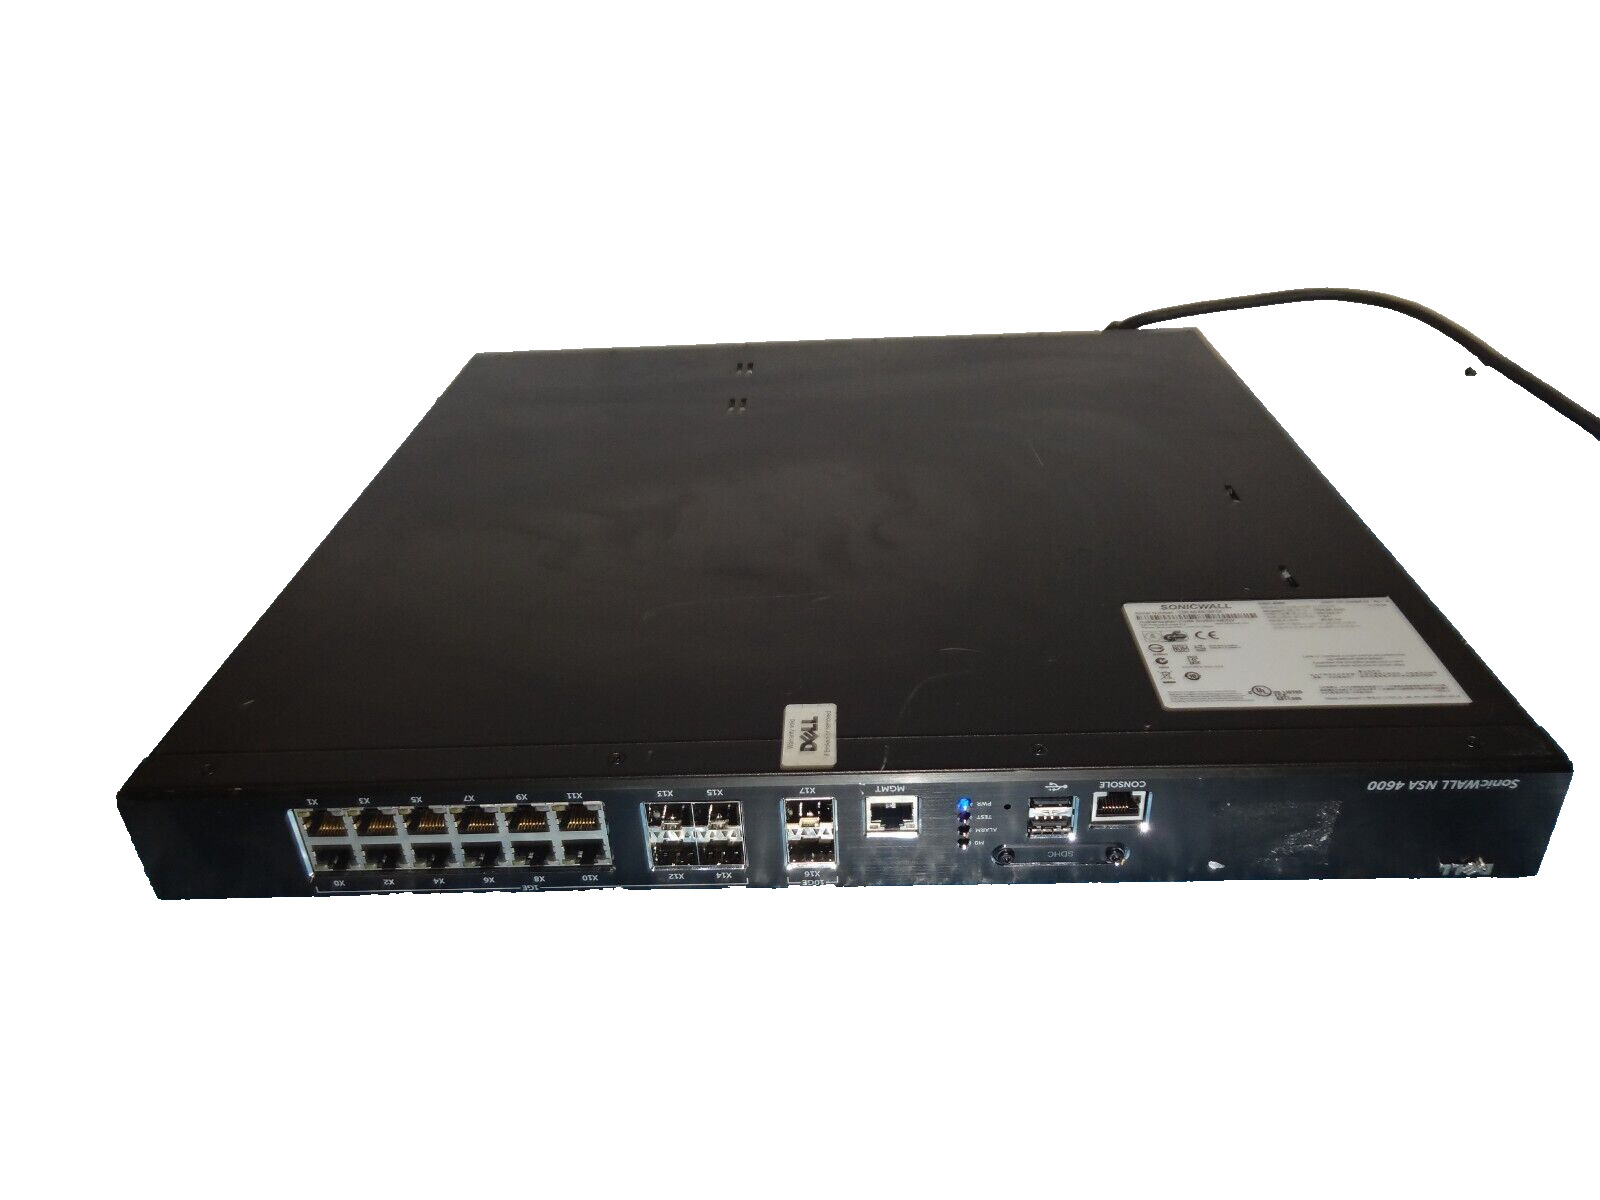 DELL SONICWALL NSA 4600 FIREWALL 12 PORT NETWORK SECURITY APPLIANCE 1RK26-0A3